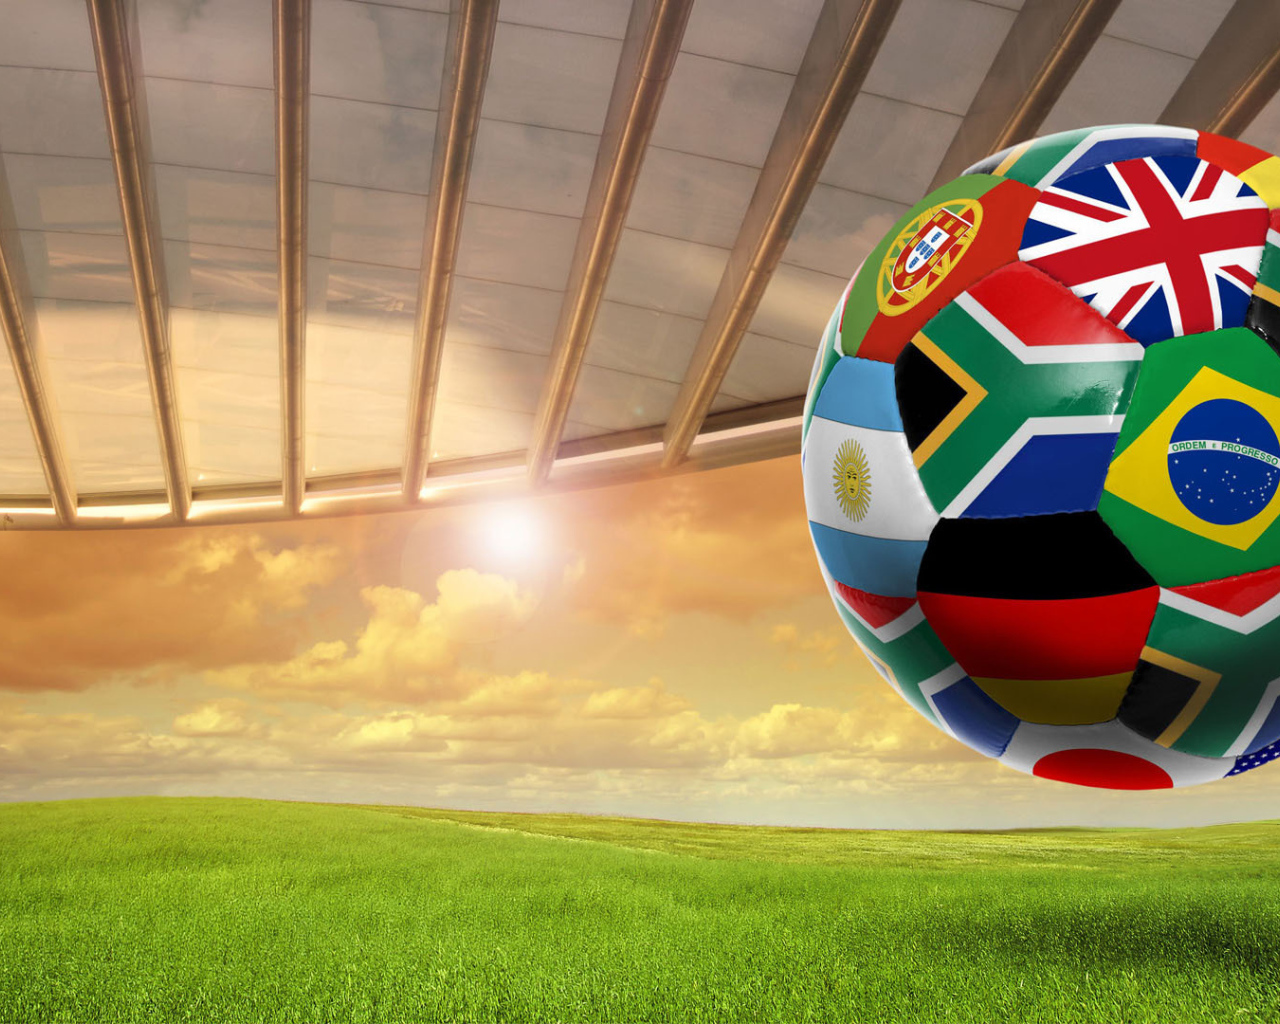 Ball of the flags on the World Cup in Brazil 2014